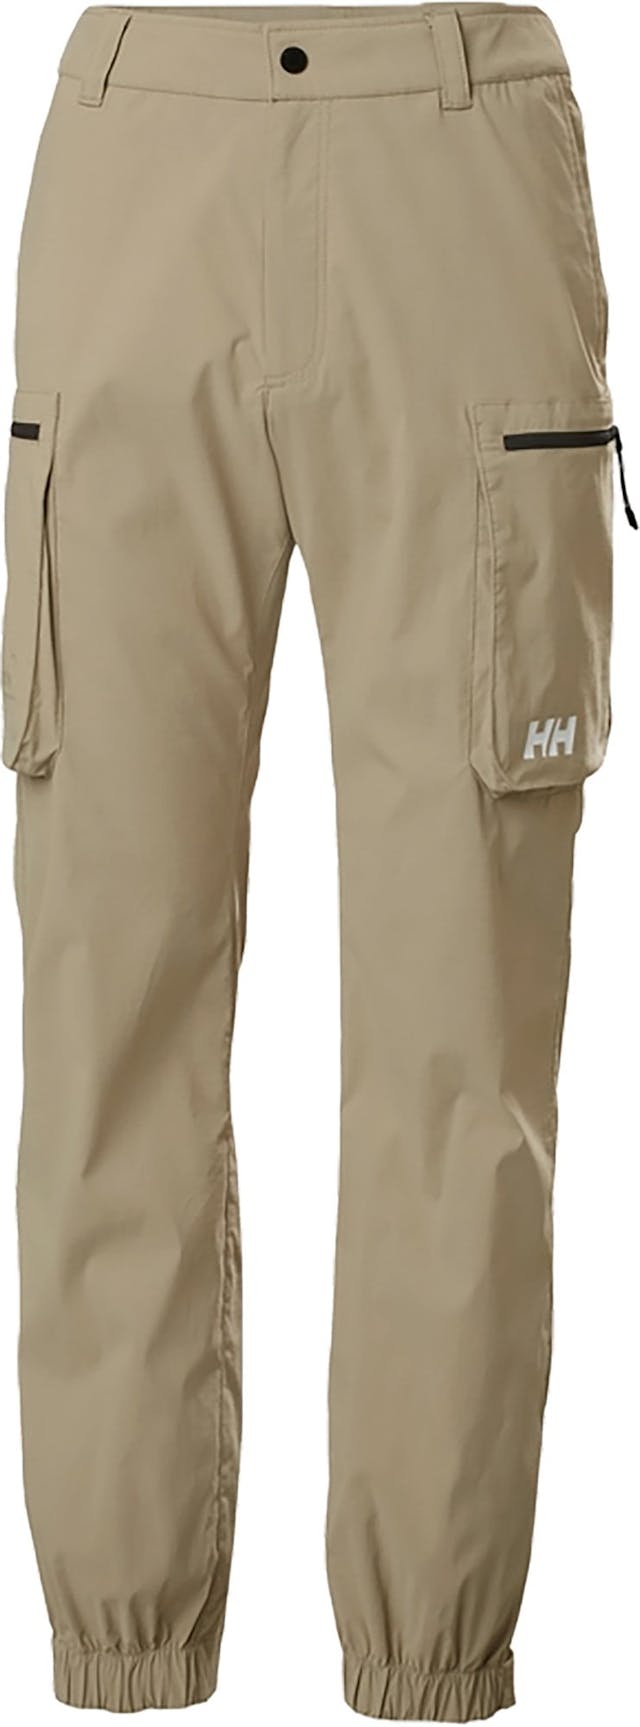 Product image for Move Quick-Dry 2.0 Pants - Men's